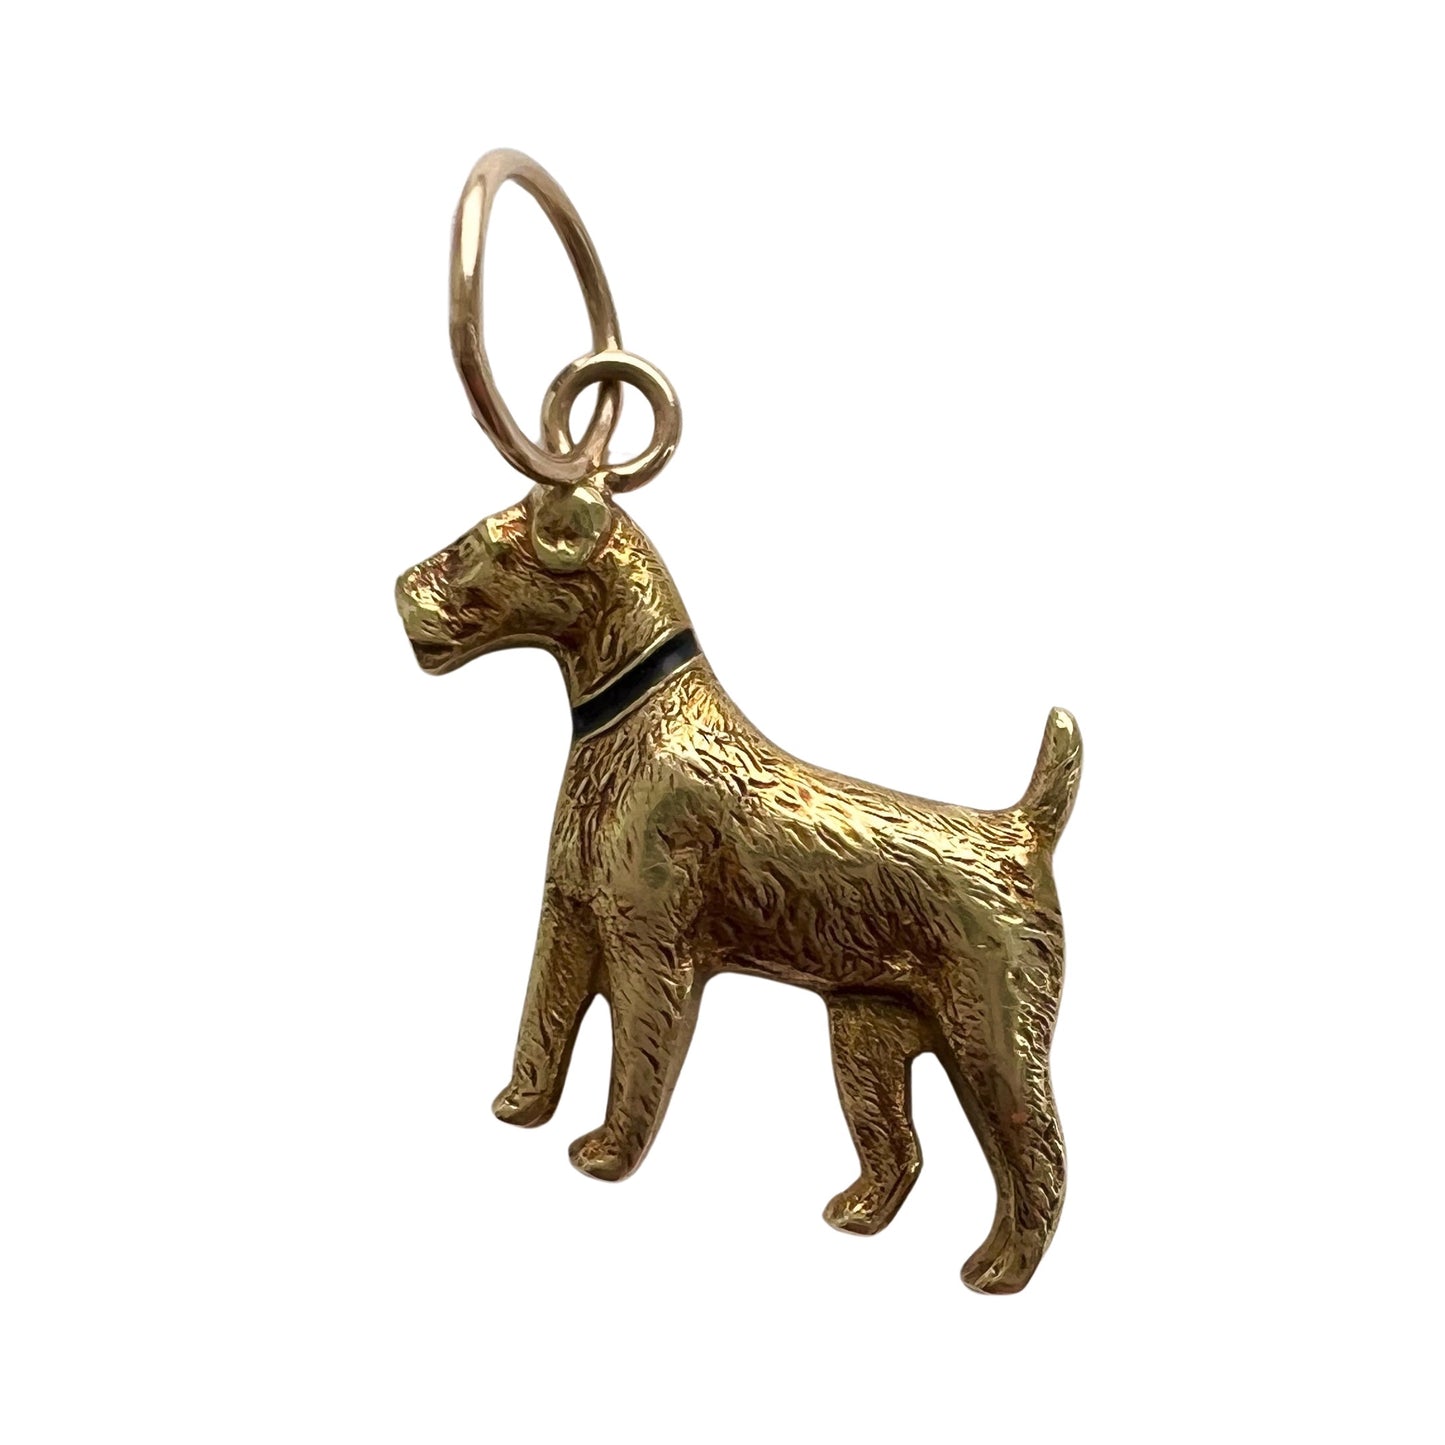 reimagined V I N T A G E // tiniest terrier / 14k and enamel dog / pin conversion pendant